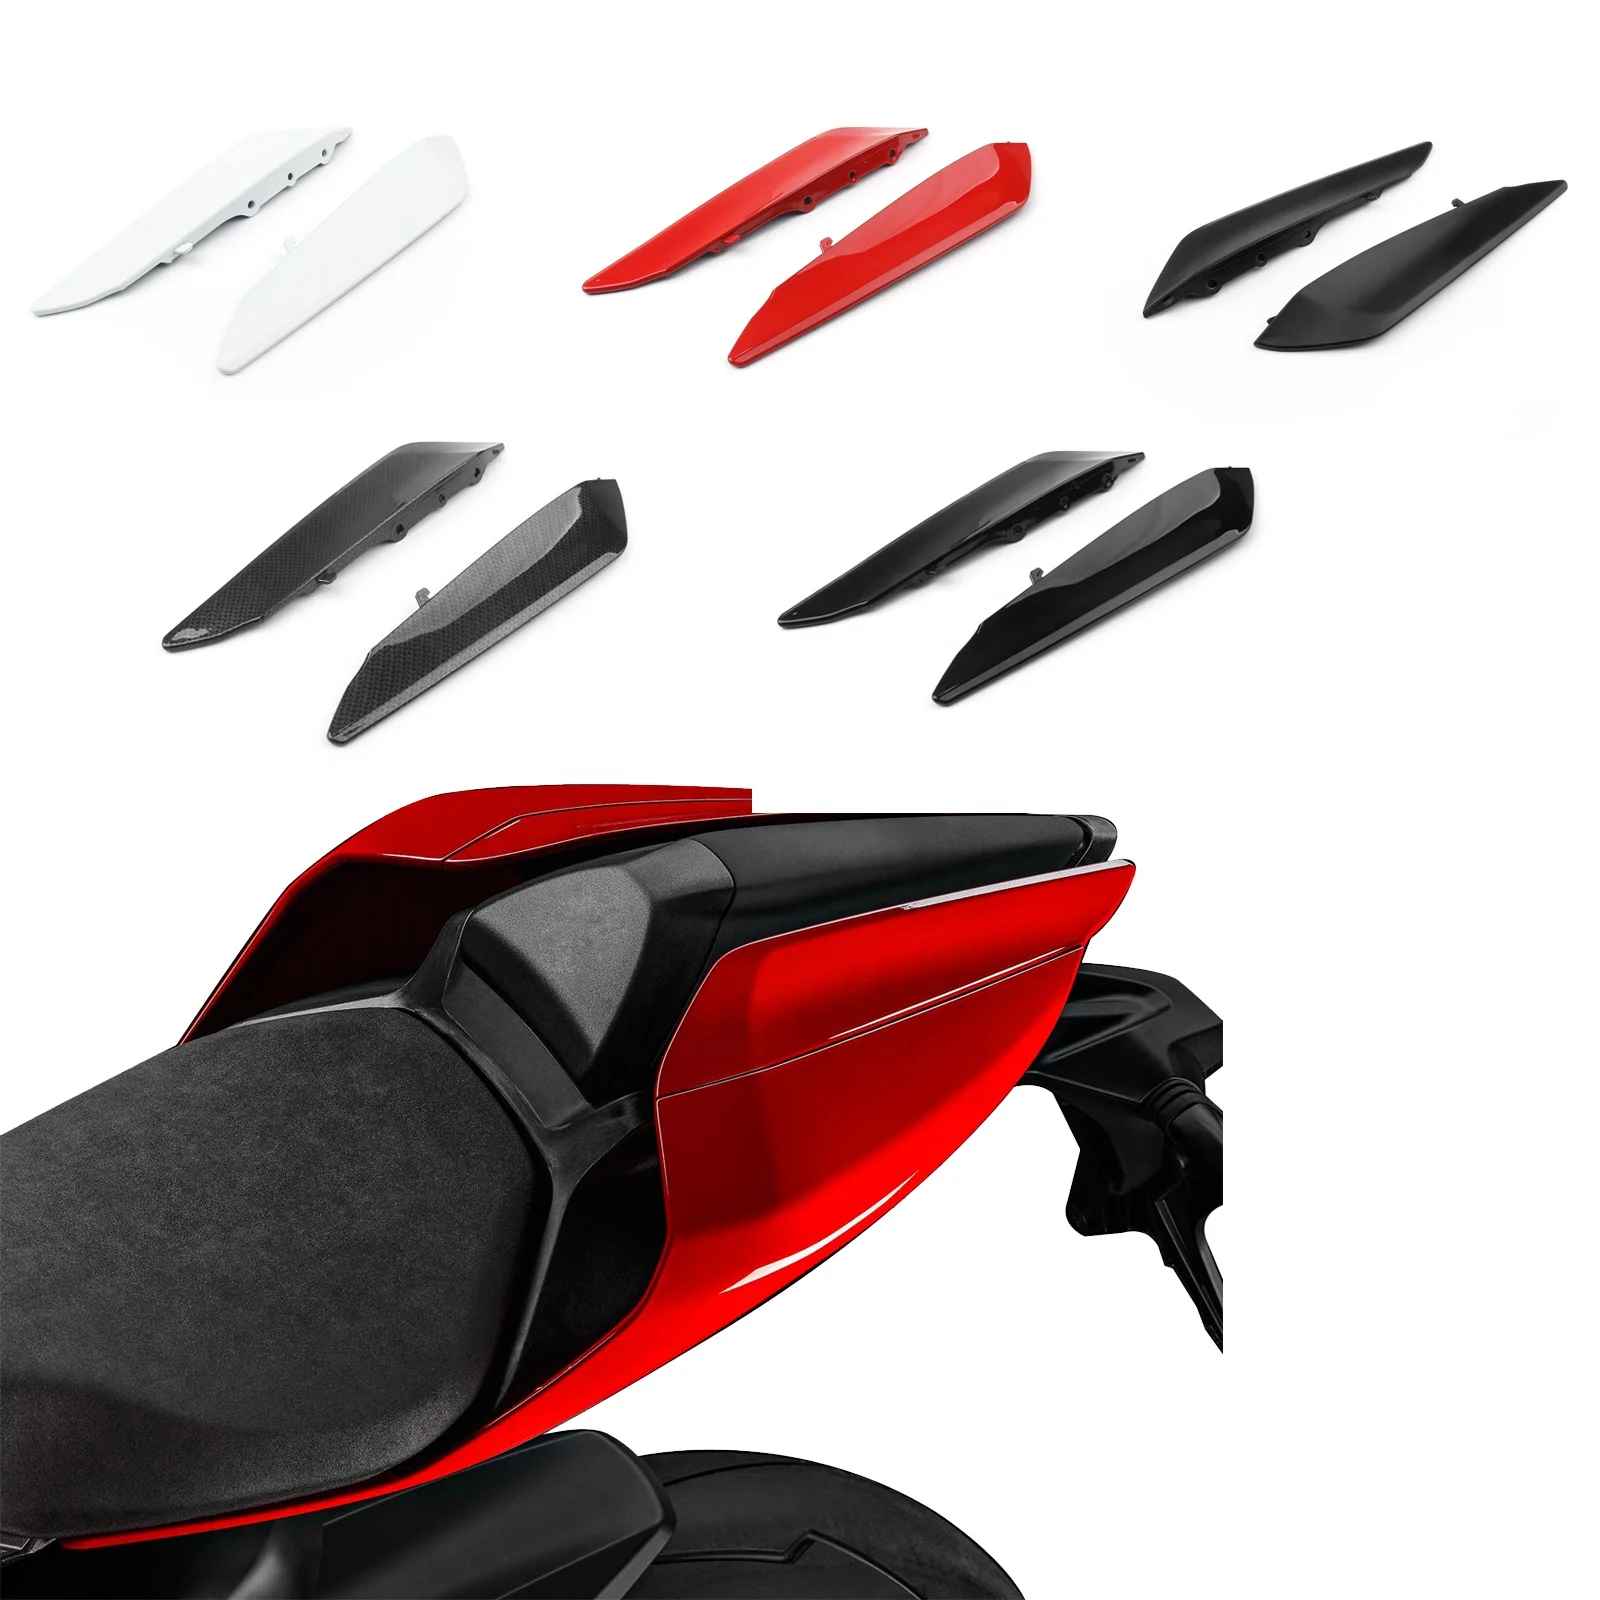 

Free Shipping Rear Tail Side Seat Panel Trim Fairing Cowl Cover For Ducati 959 1299 2015-2018, Black,mblack,carbon,red,white